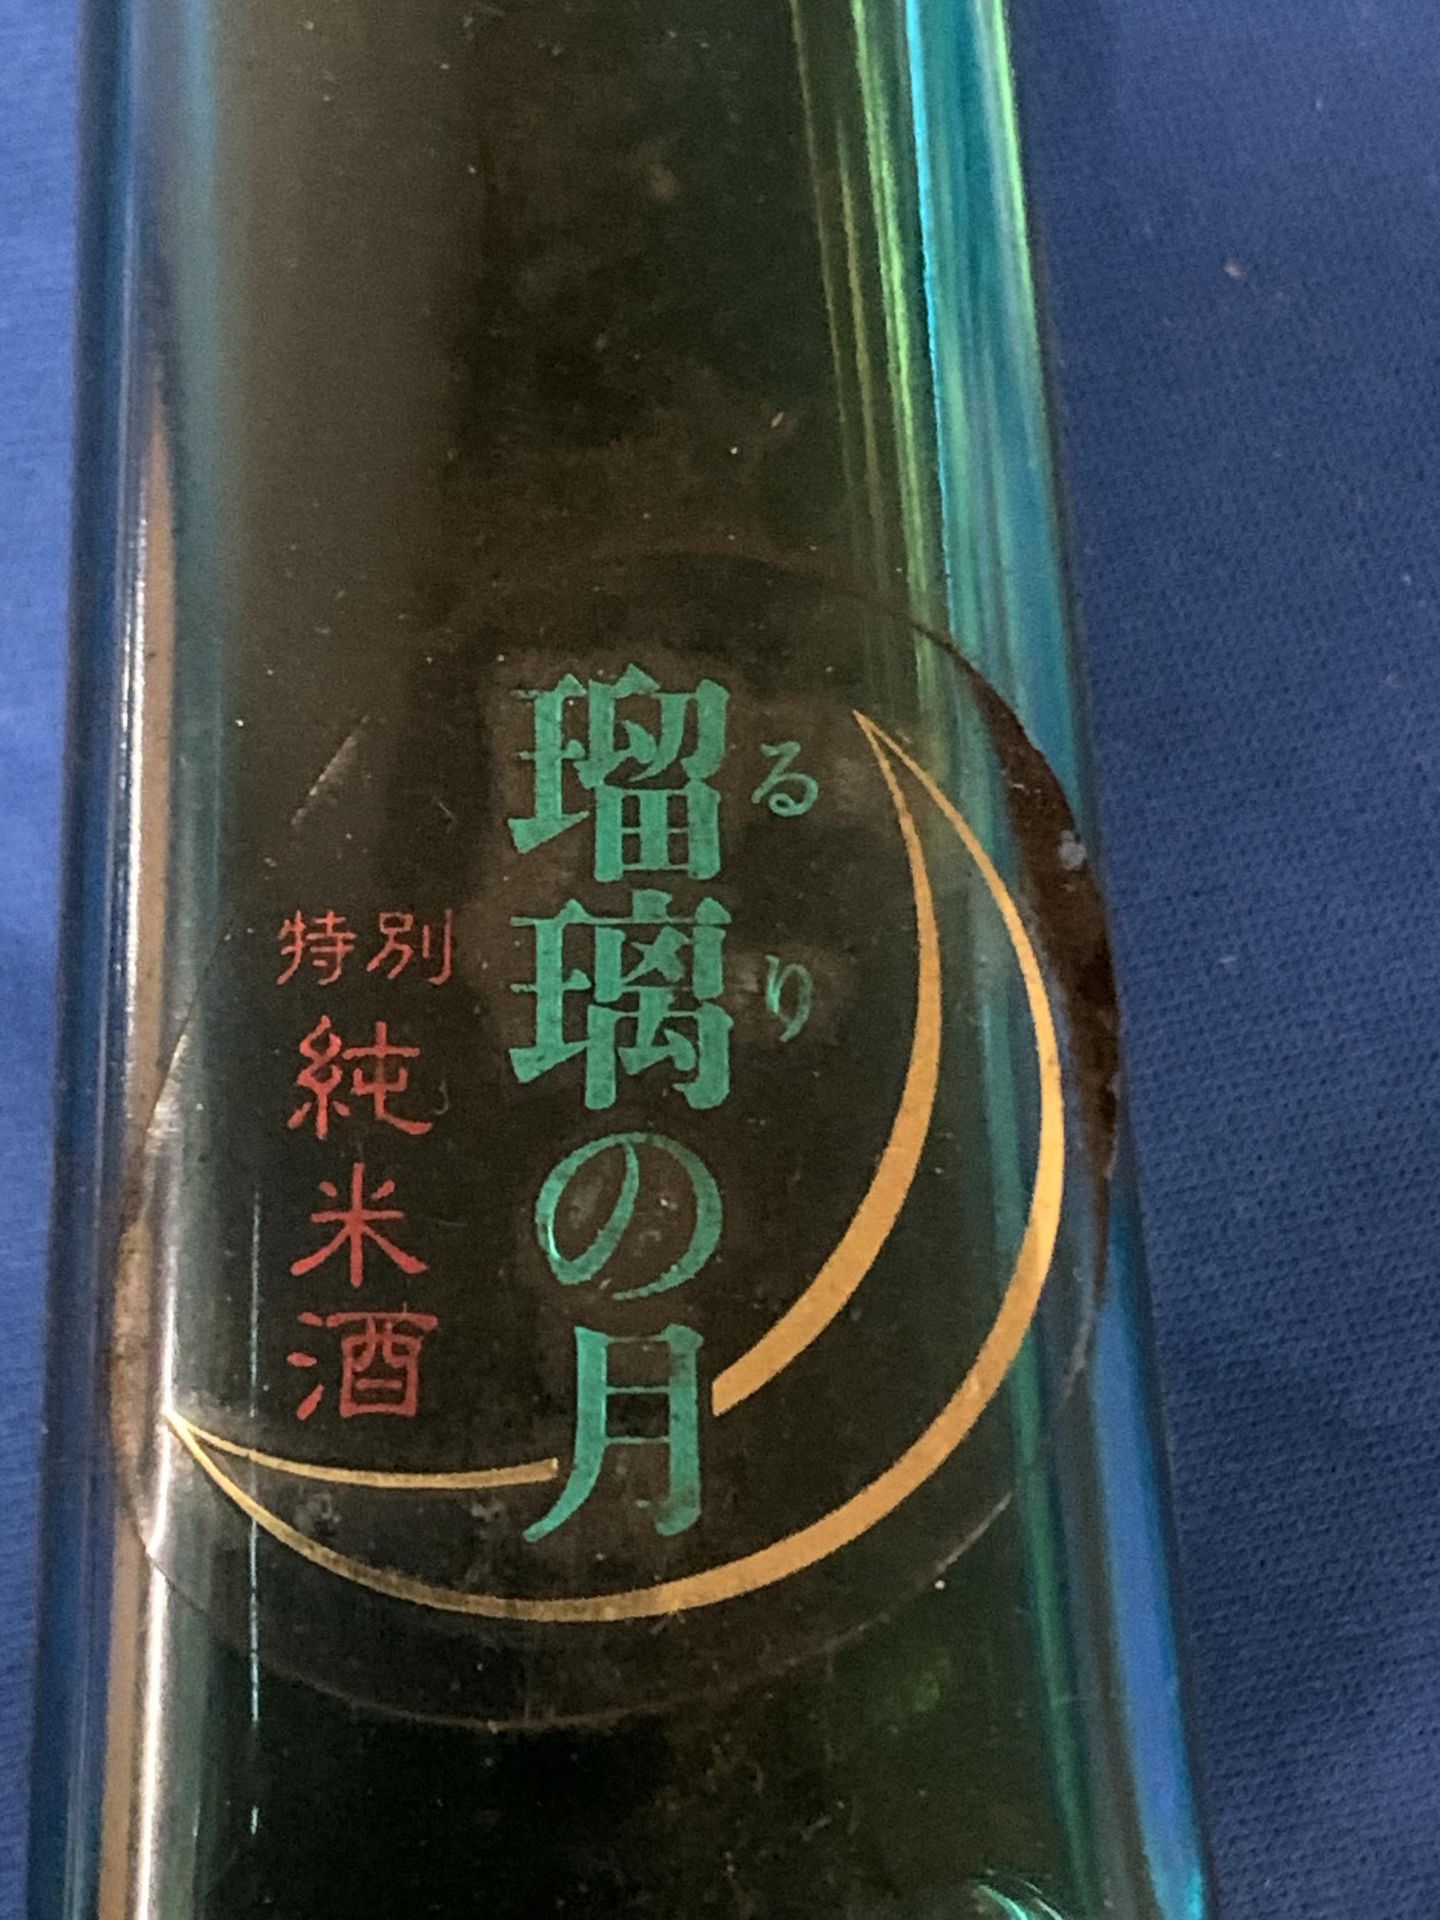 TWO BOTTLE OF ORIENTAL LIQUER - Image 2 of 6